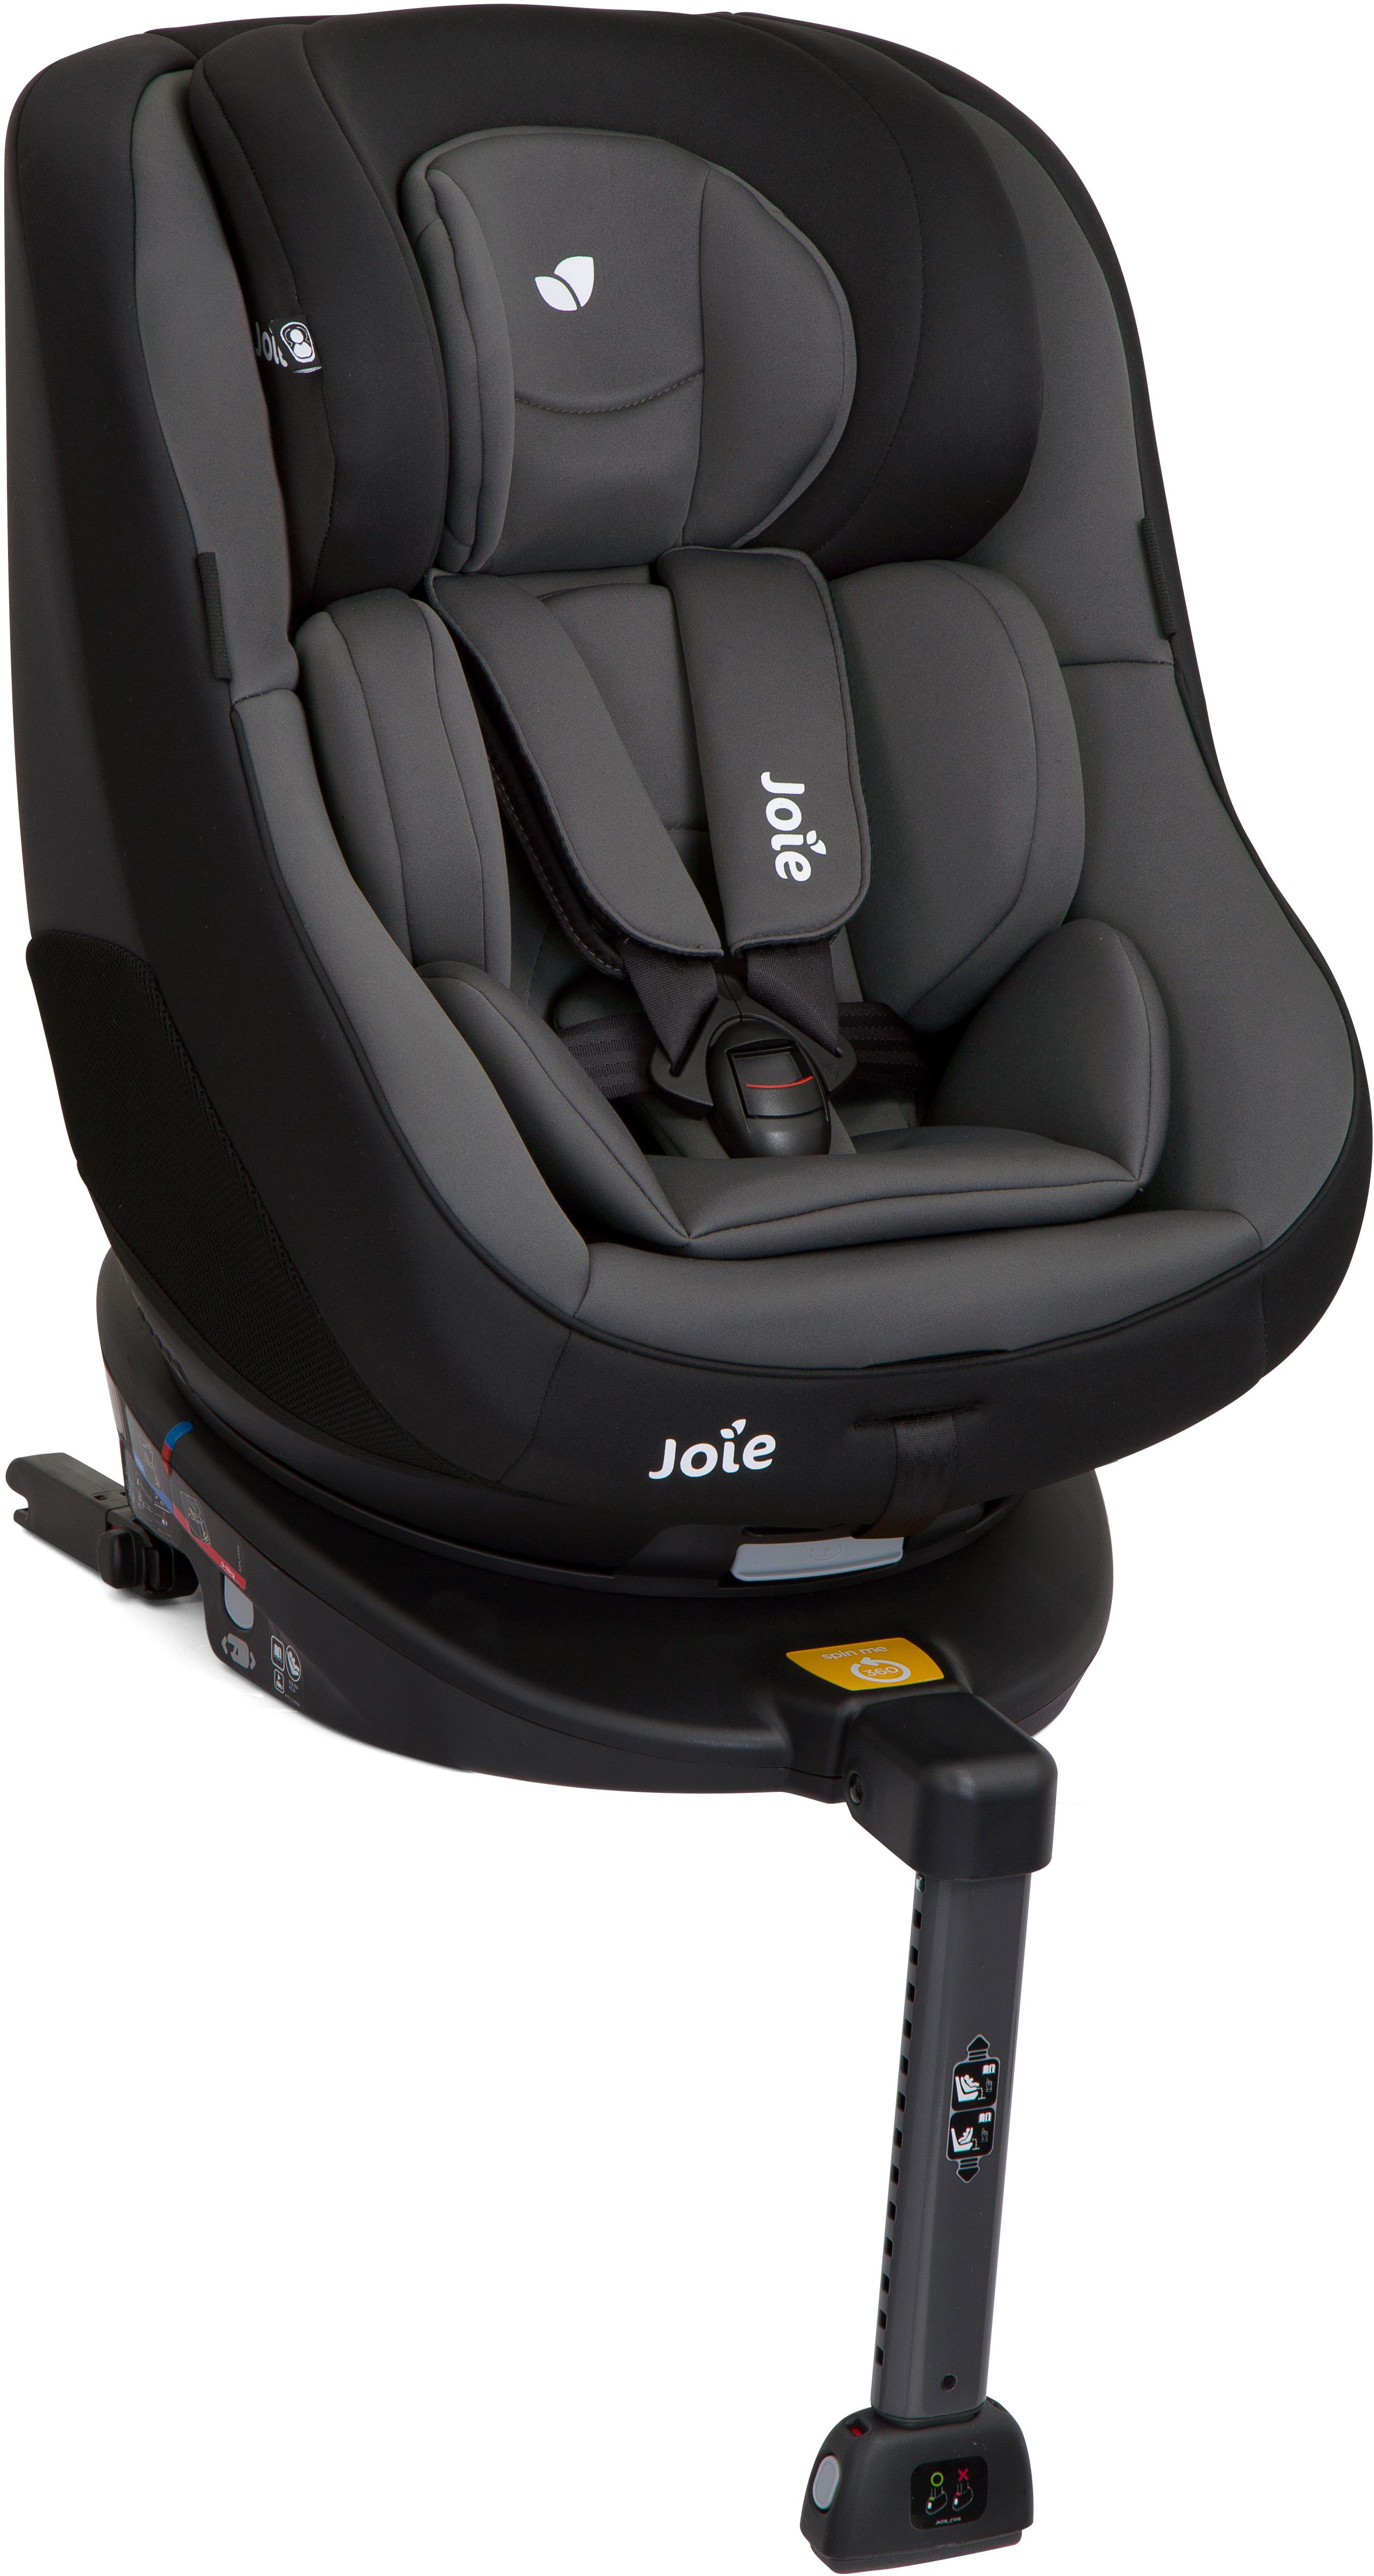 Joie Spin 360 Group 0+1 Baby Car Seat - Ember for only £220.00